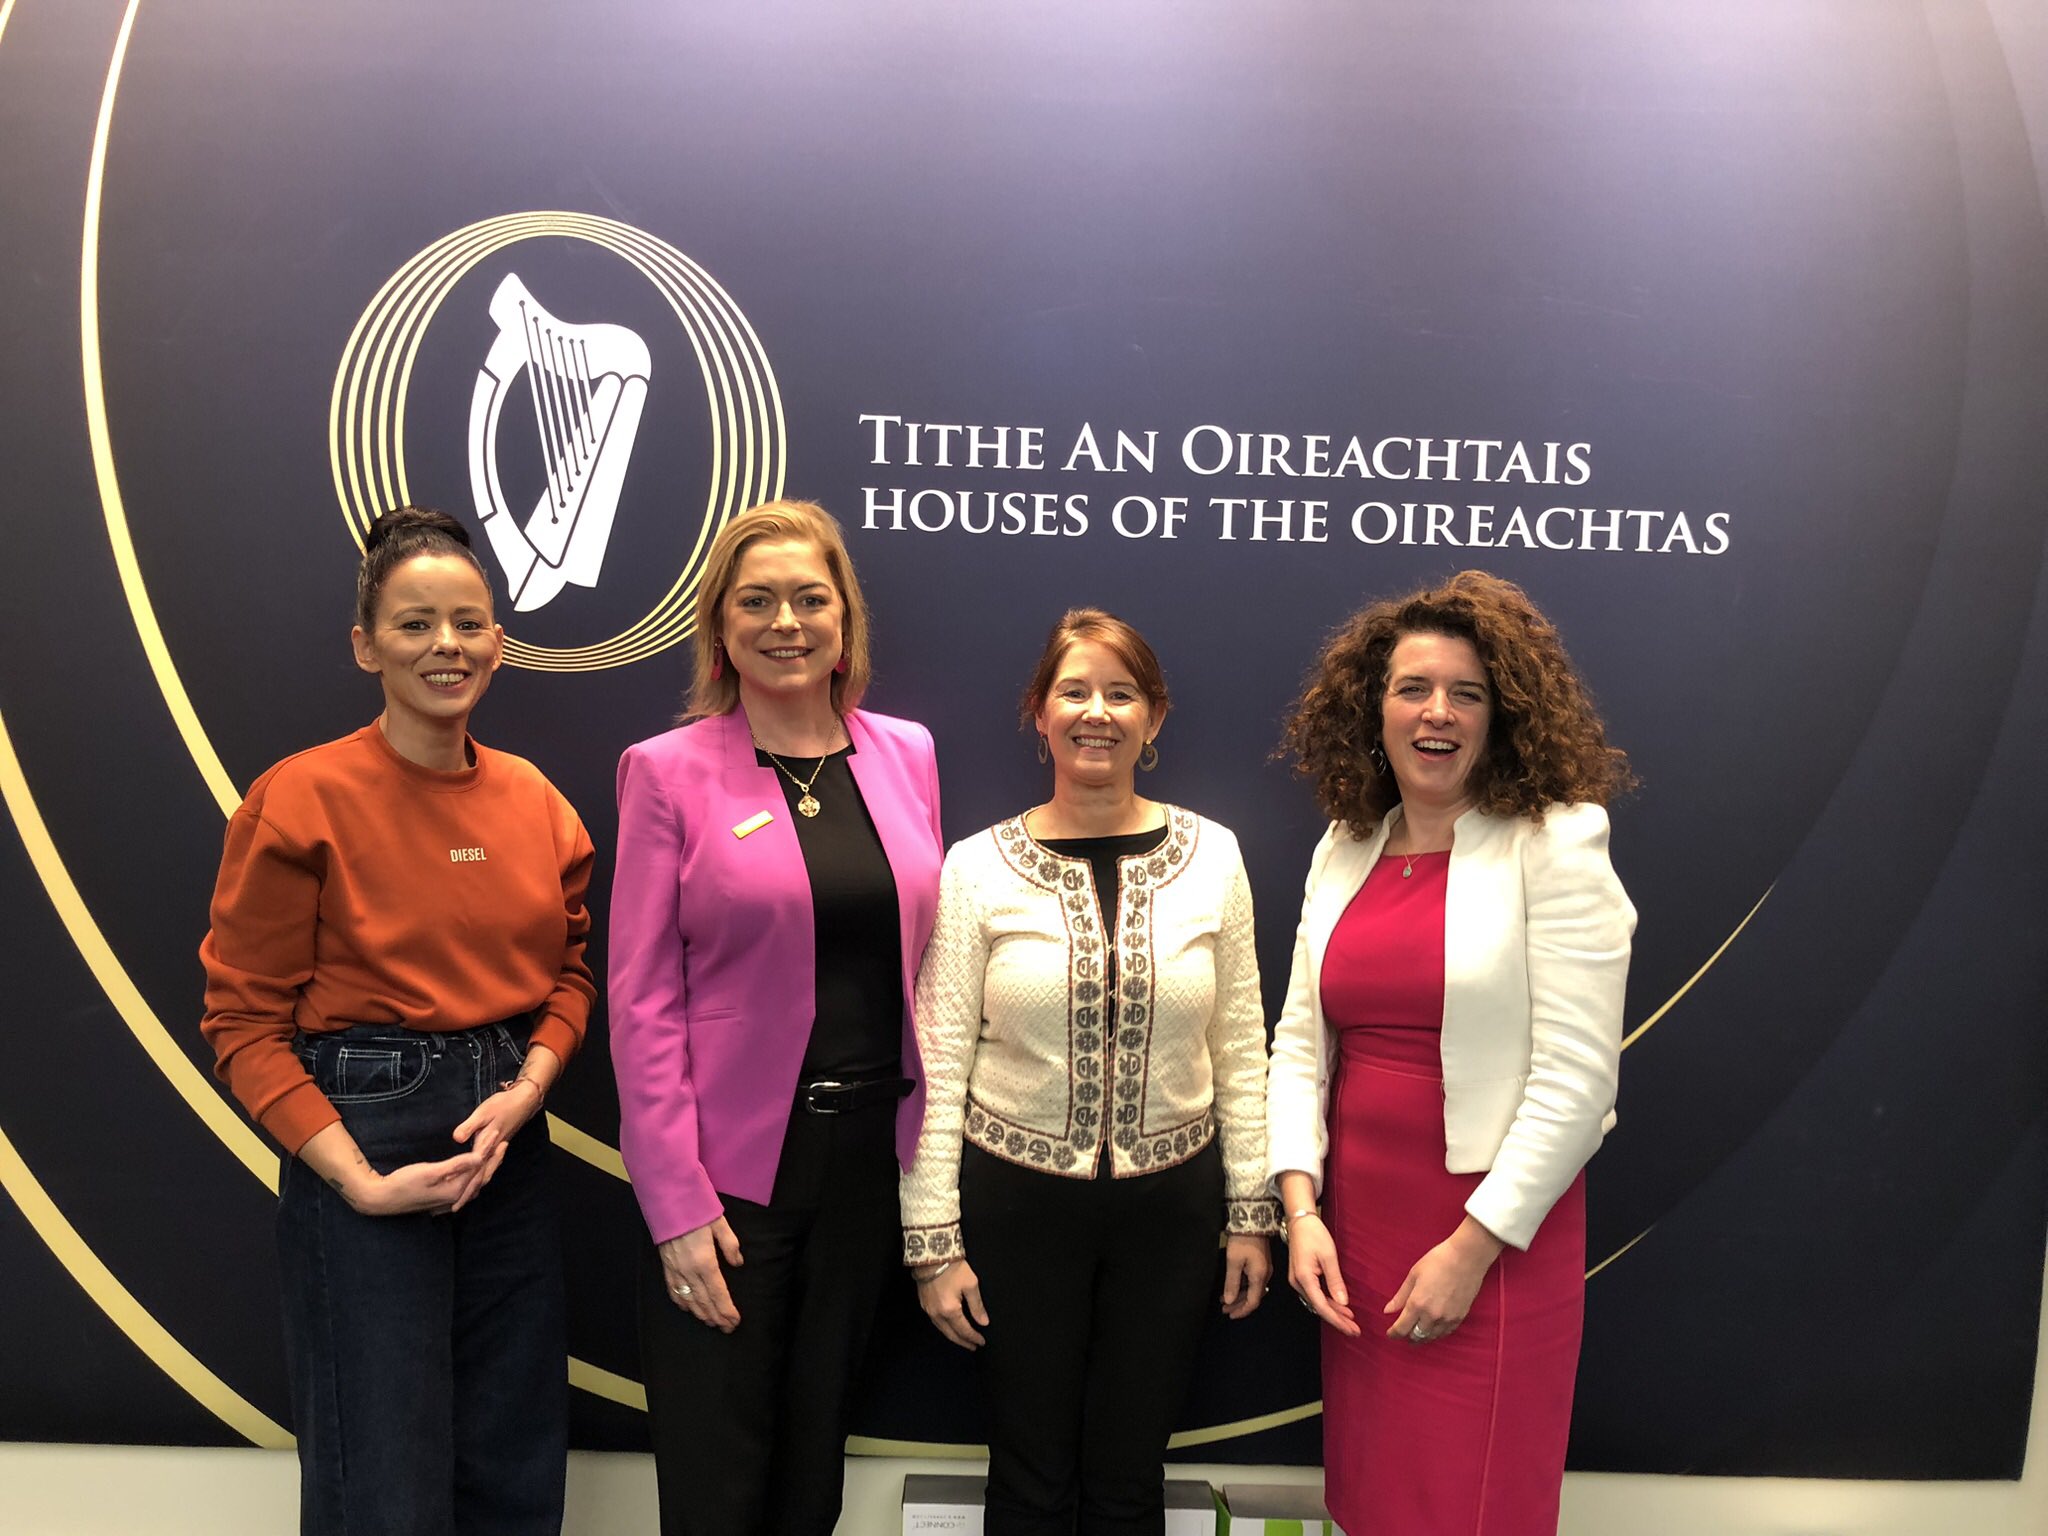 Professor Louise Crowley, Director of the UCC Bystander Intervention Programme, and Céline Griffin, Manager of the same programme, pictured at the Oireachtas with Senator Eileen Dolan and Senator Aisling Dolan